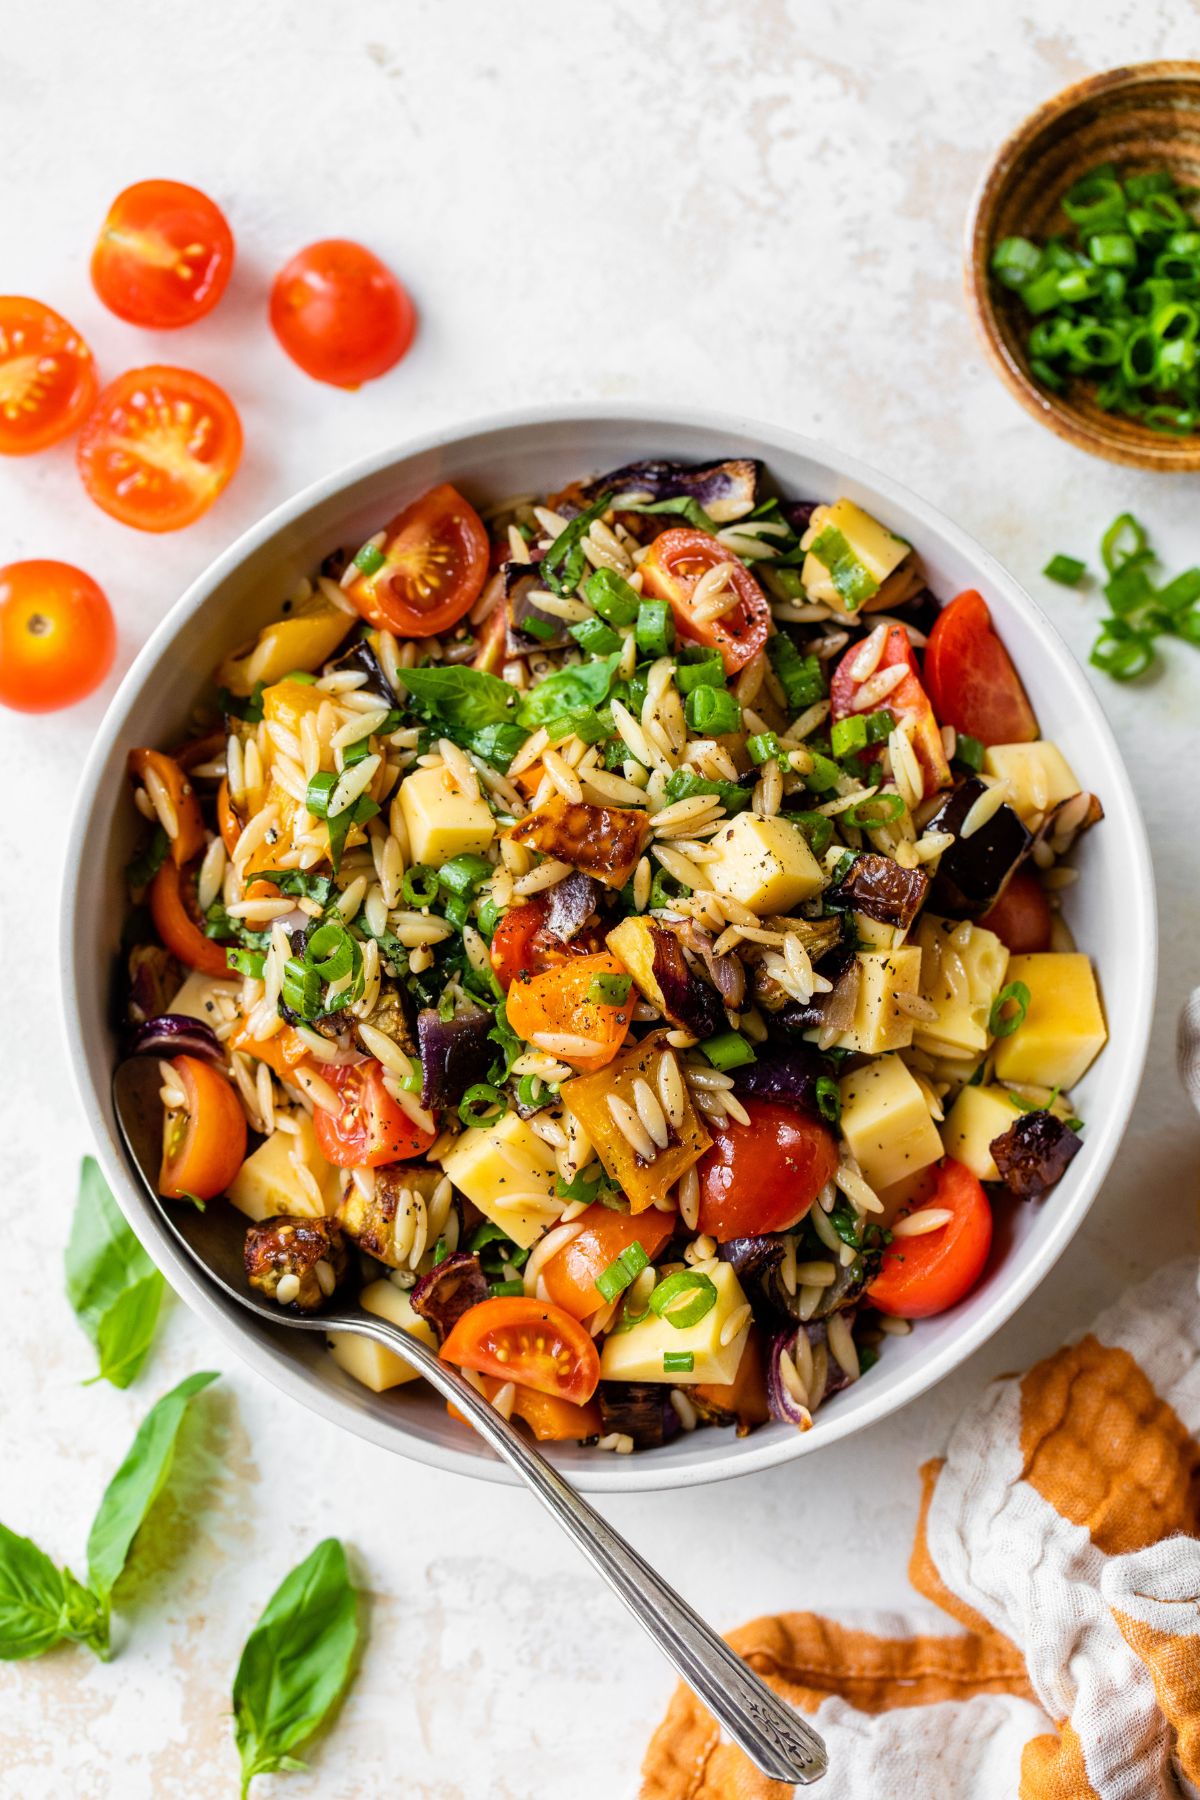 Pasta salad made with orzo and roasted vegetables.